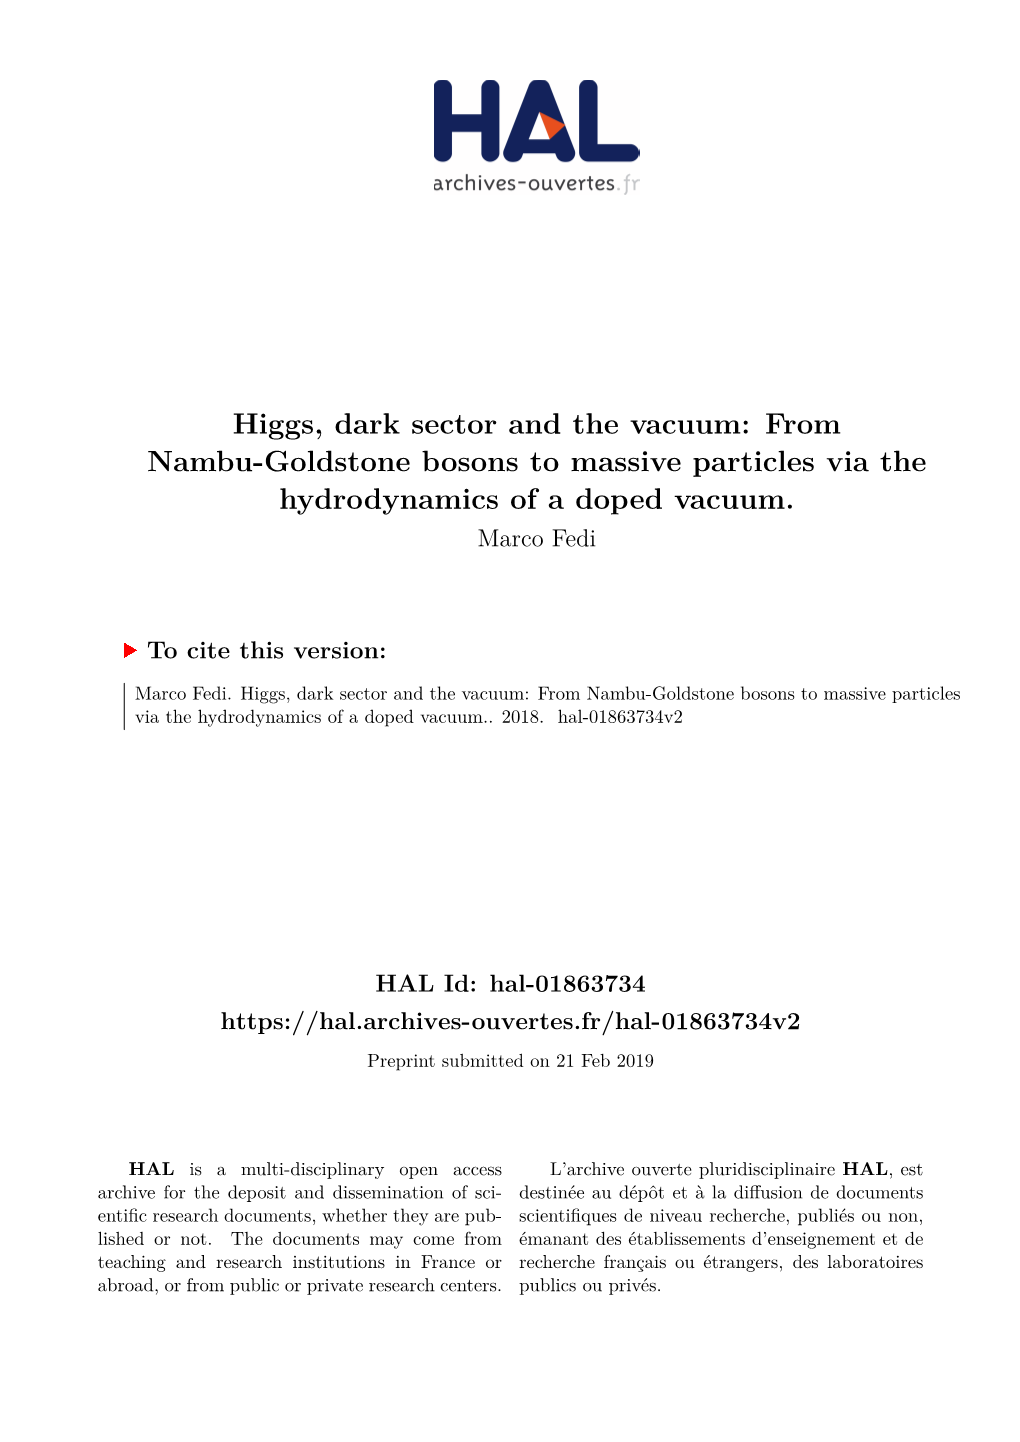 Higgs, Dark Sector and the Vacuum: from Nambu-Goldstone Bosons to Massive Particles Via the Hydrodynamics of a Doped Vacuum